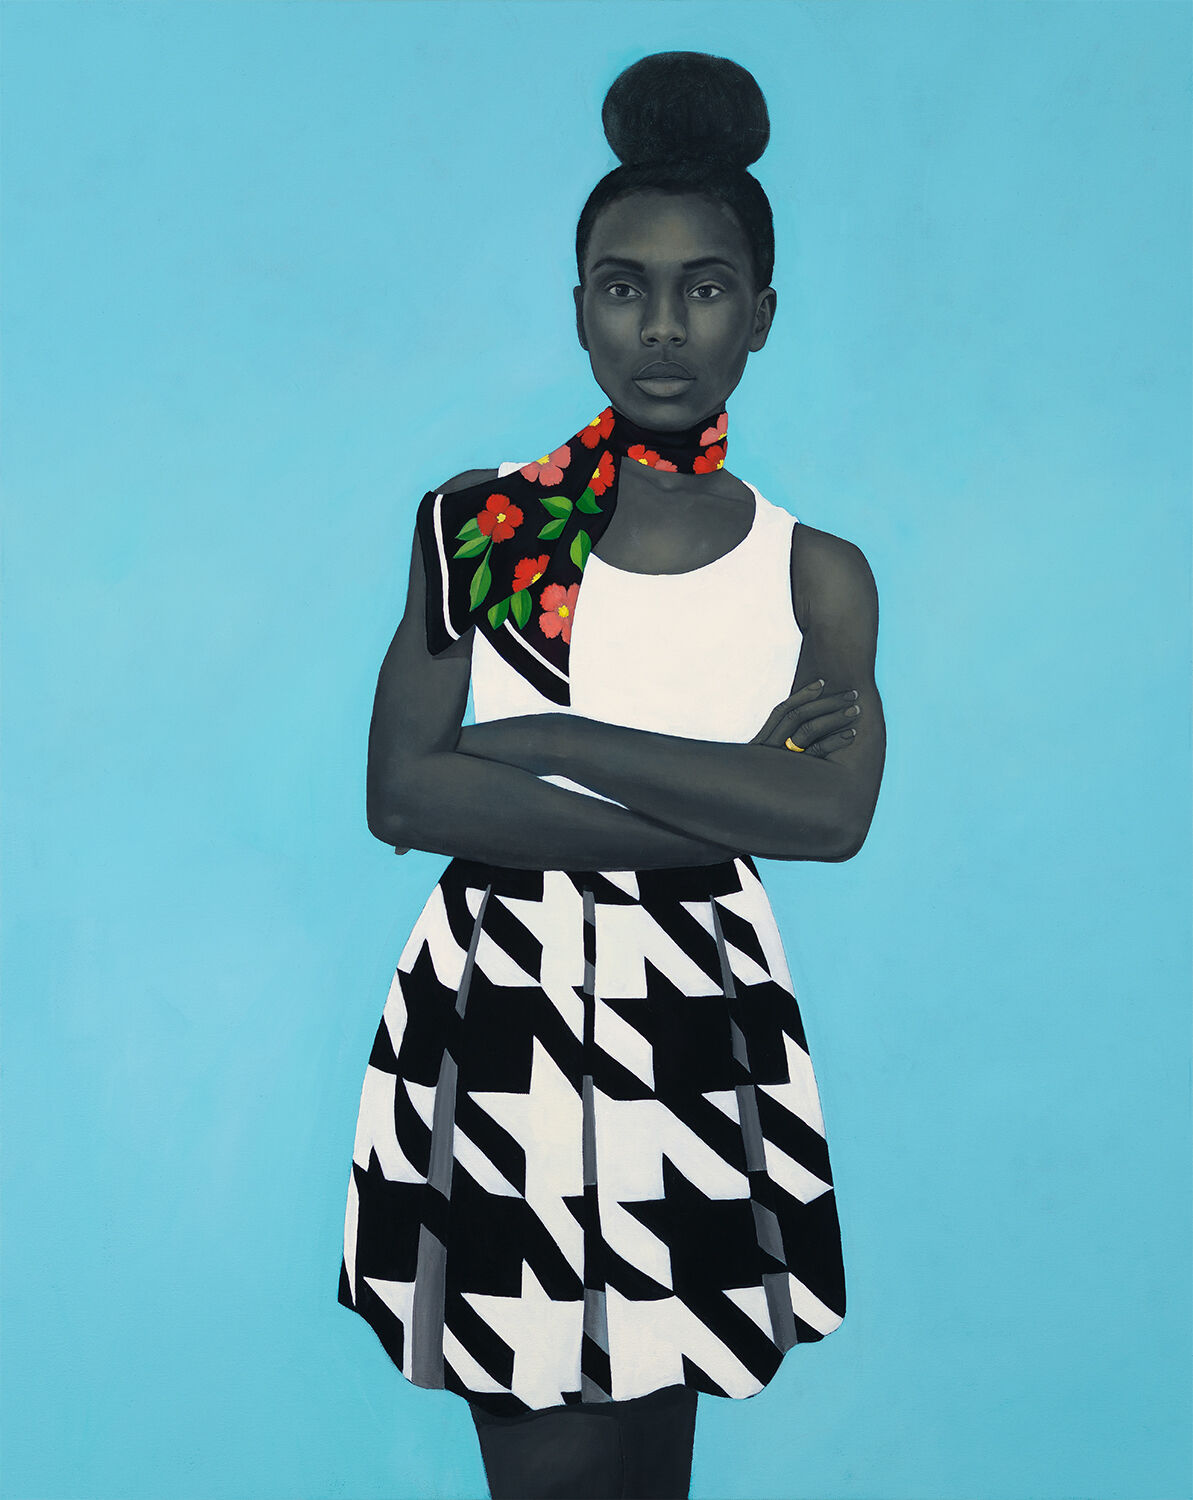 Amy Sherald, A clear unspoken granted magic, 2017. © Amy Sherald. Courtesy of the artist, Monique Meloche Gallery, and Denise Gardner.